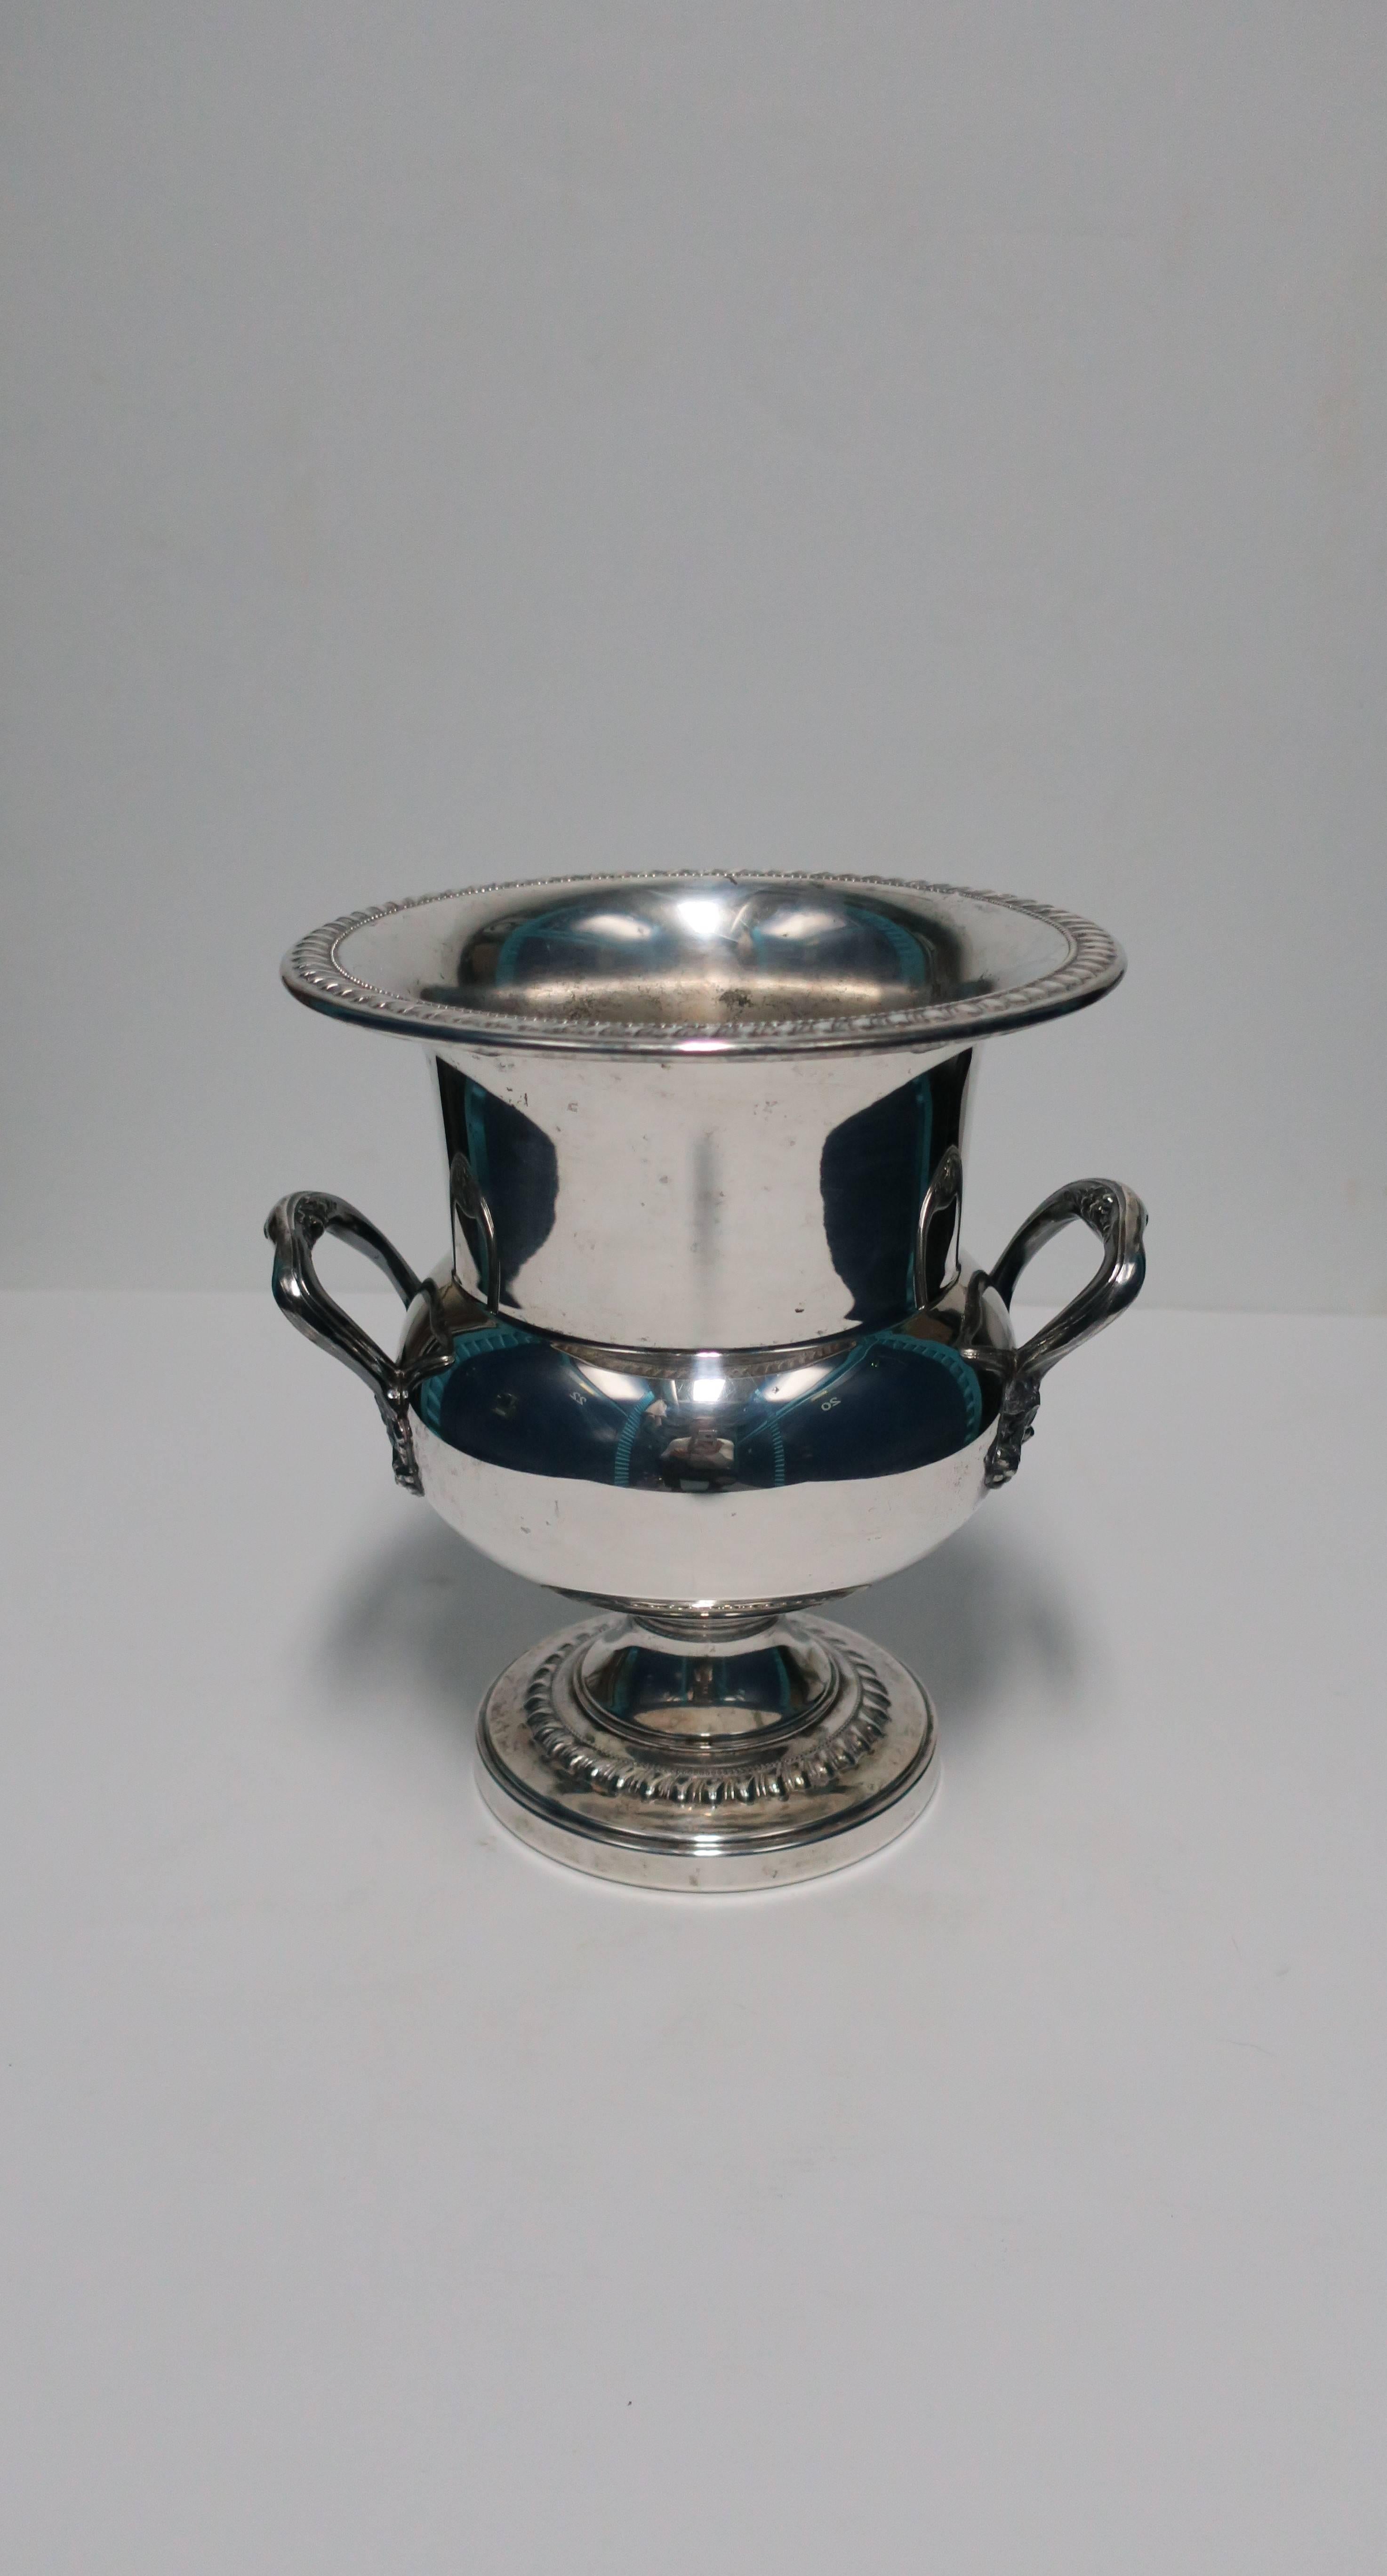 A vintage silver over copper urn form champagne or wine cooler by Sheridan. Maker's mark on bottom as show in image #10. Beautiful details around top, handles and base. Item available here online. By request, item can be made available by